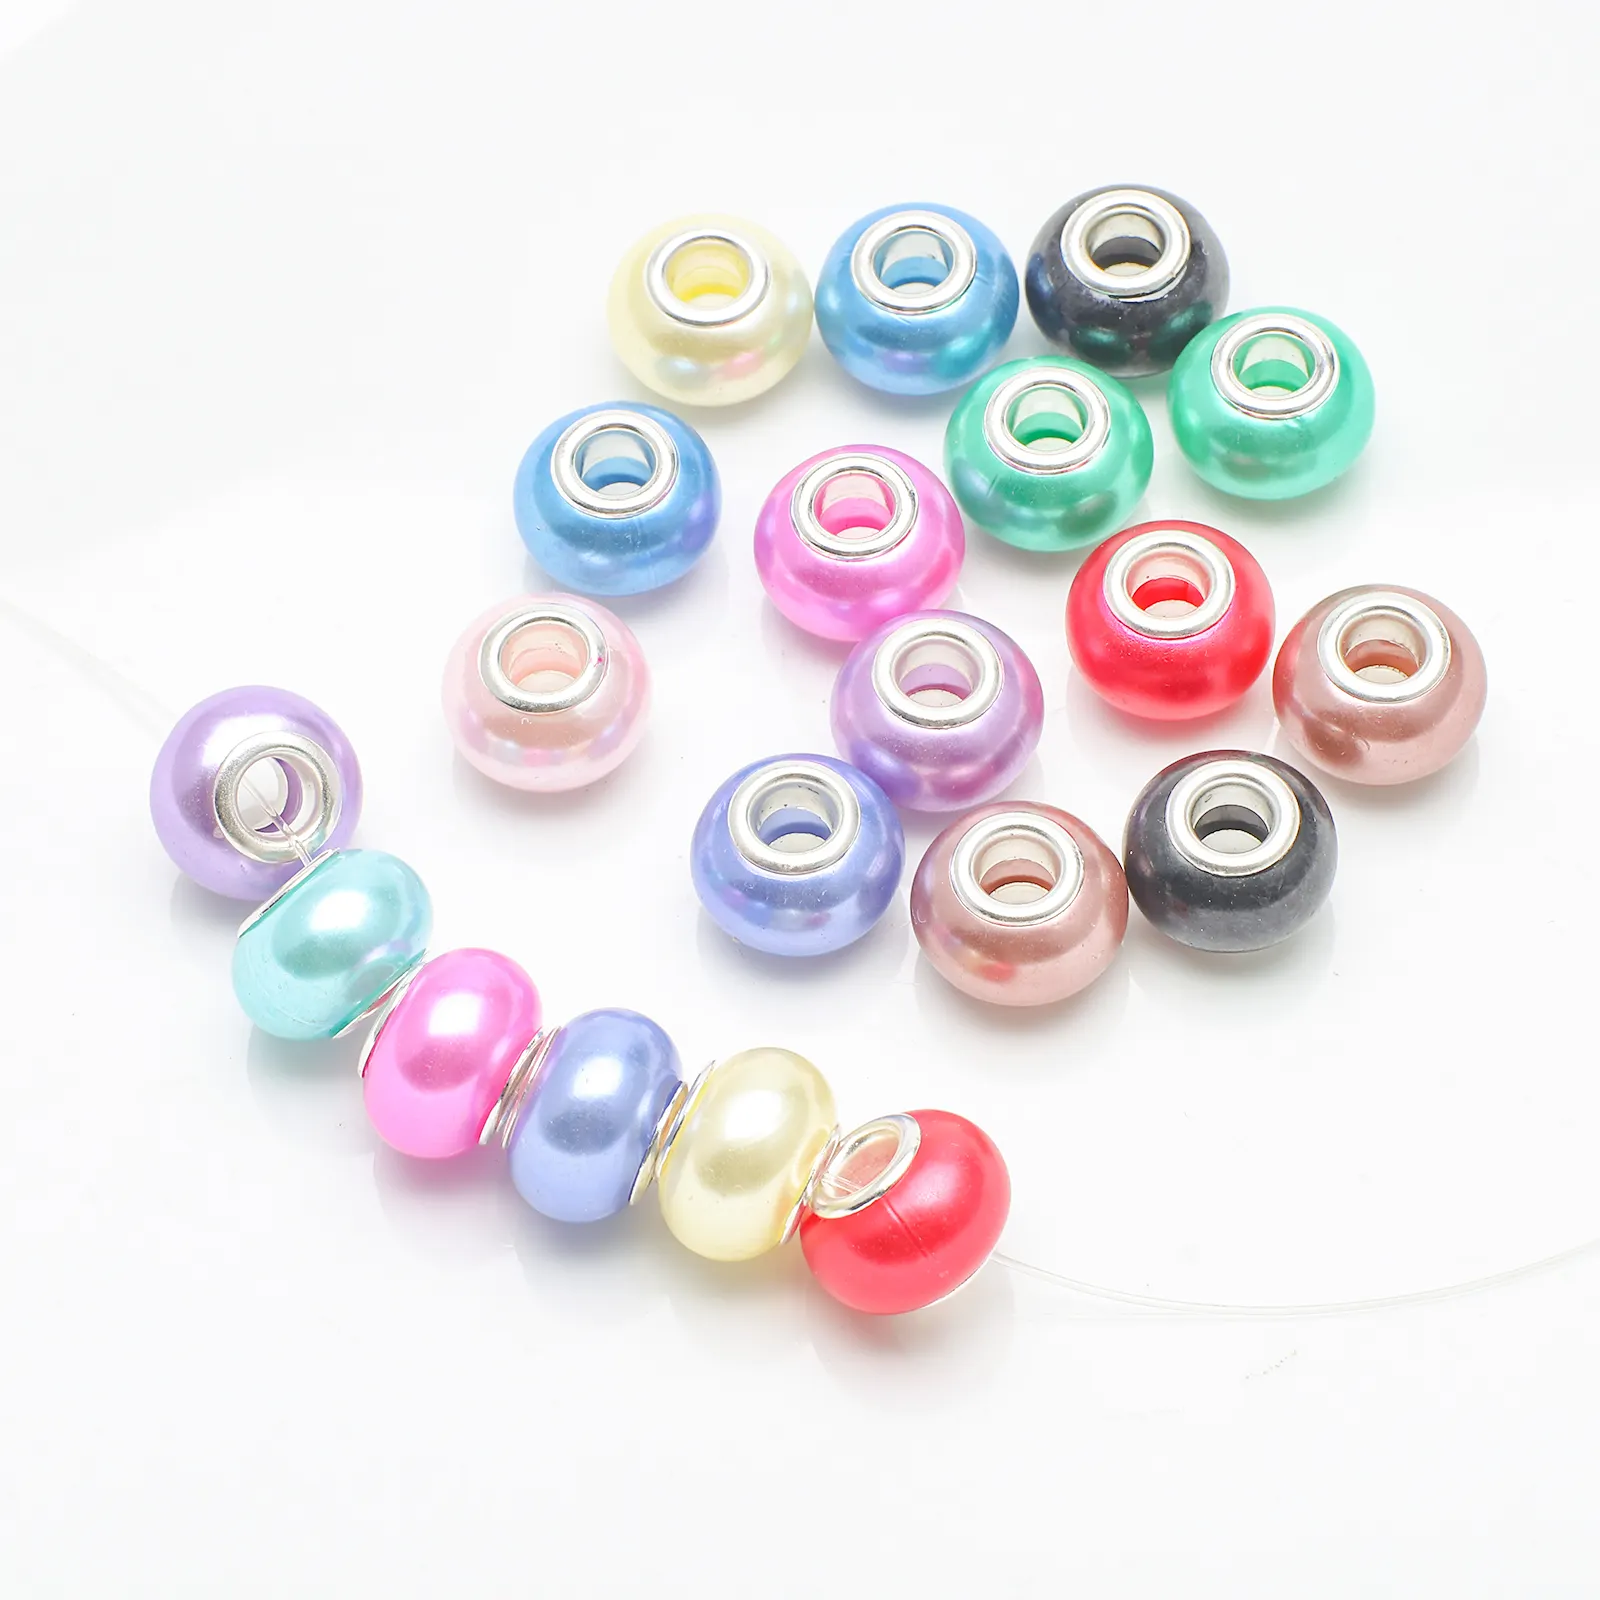 Zhubi Big Hole Spacer Beads Resin Pearl 14MM Murano Glass Beads for Bracelets DIY Crystal Charms for Jewelry Making Bracelet